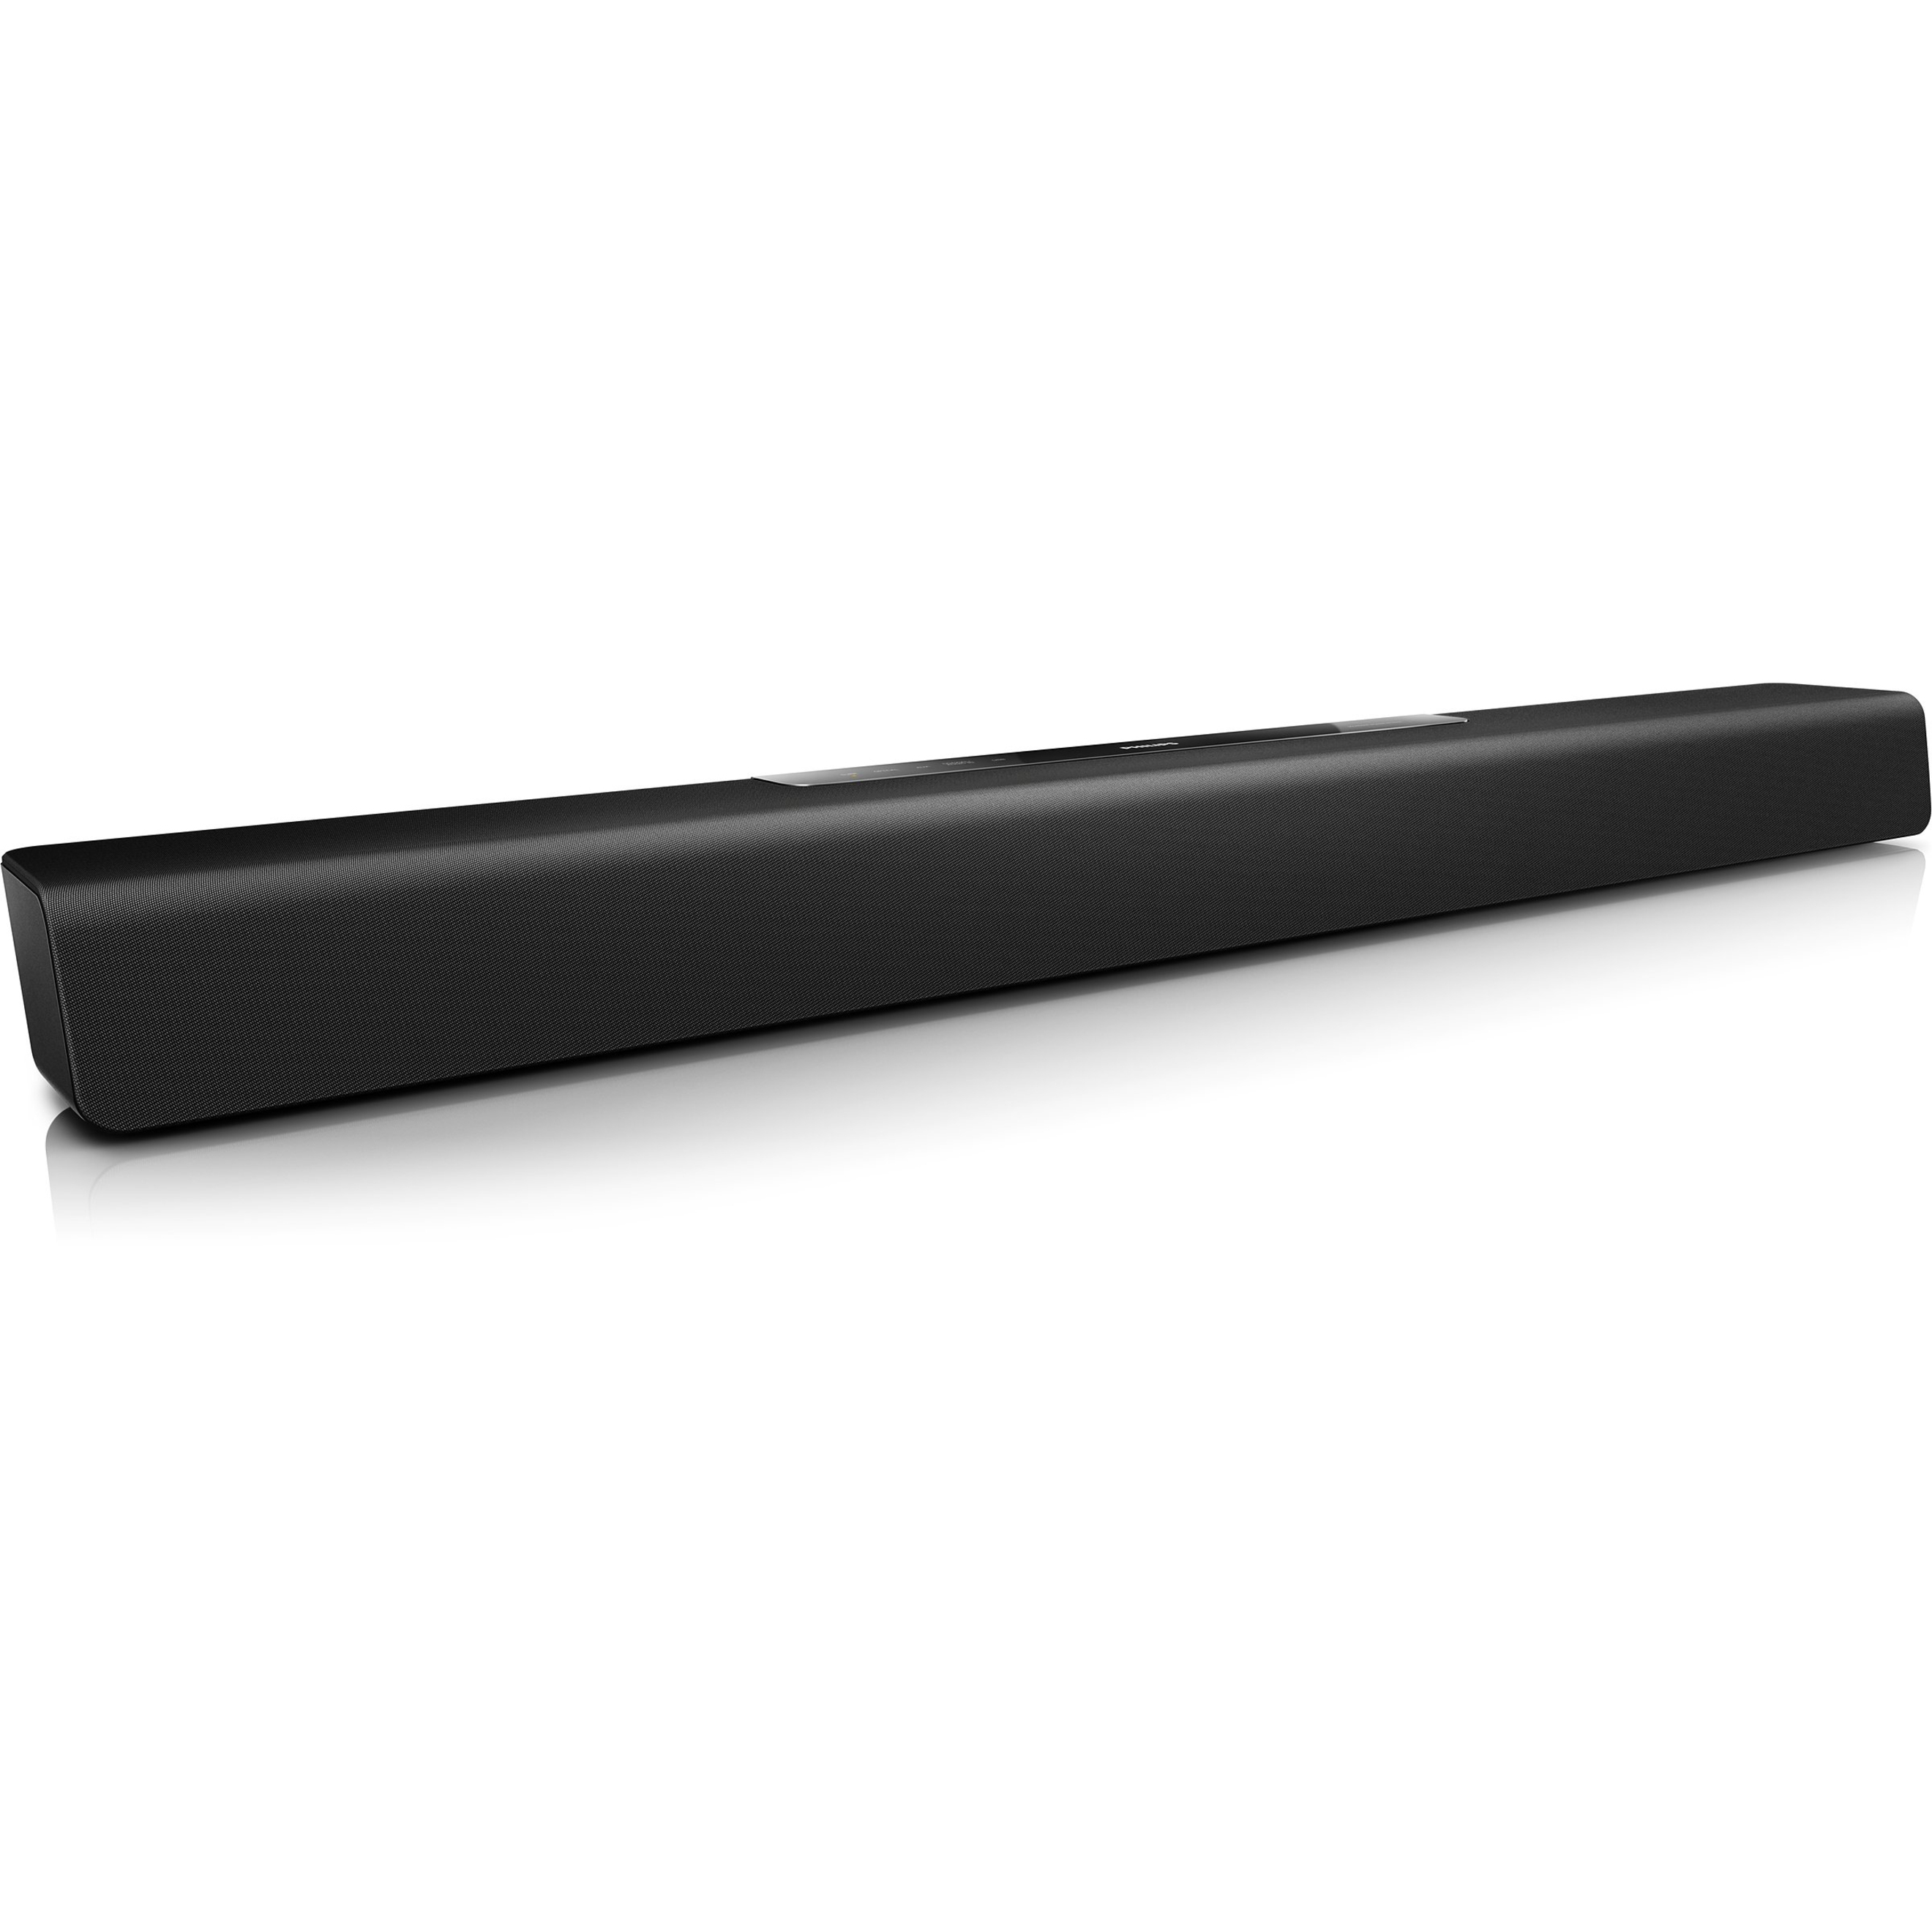 Philips HTL2101A - Sound bar - for home theater - 40 Watt (total) - image 3 of 4